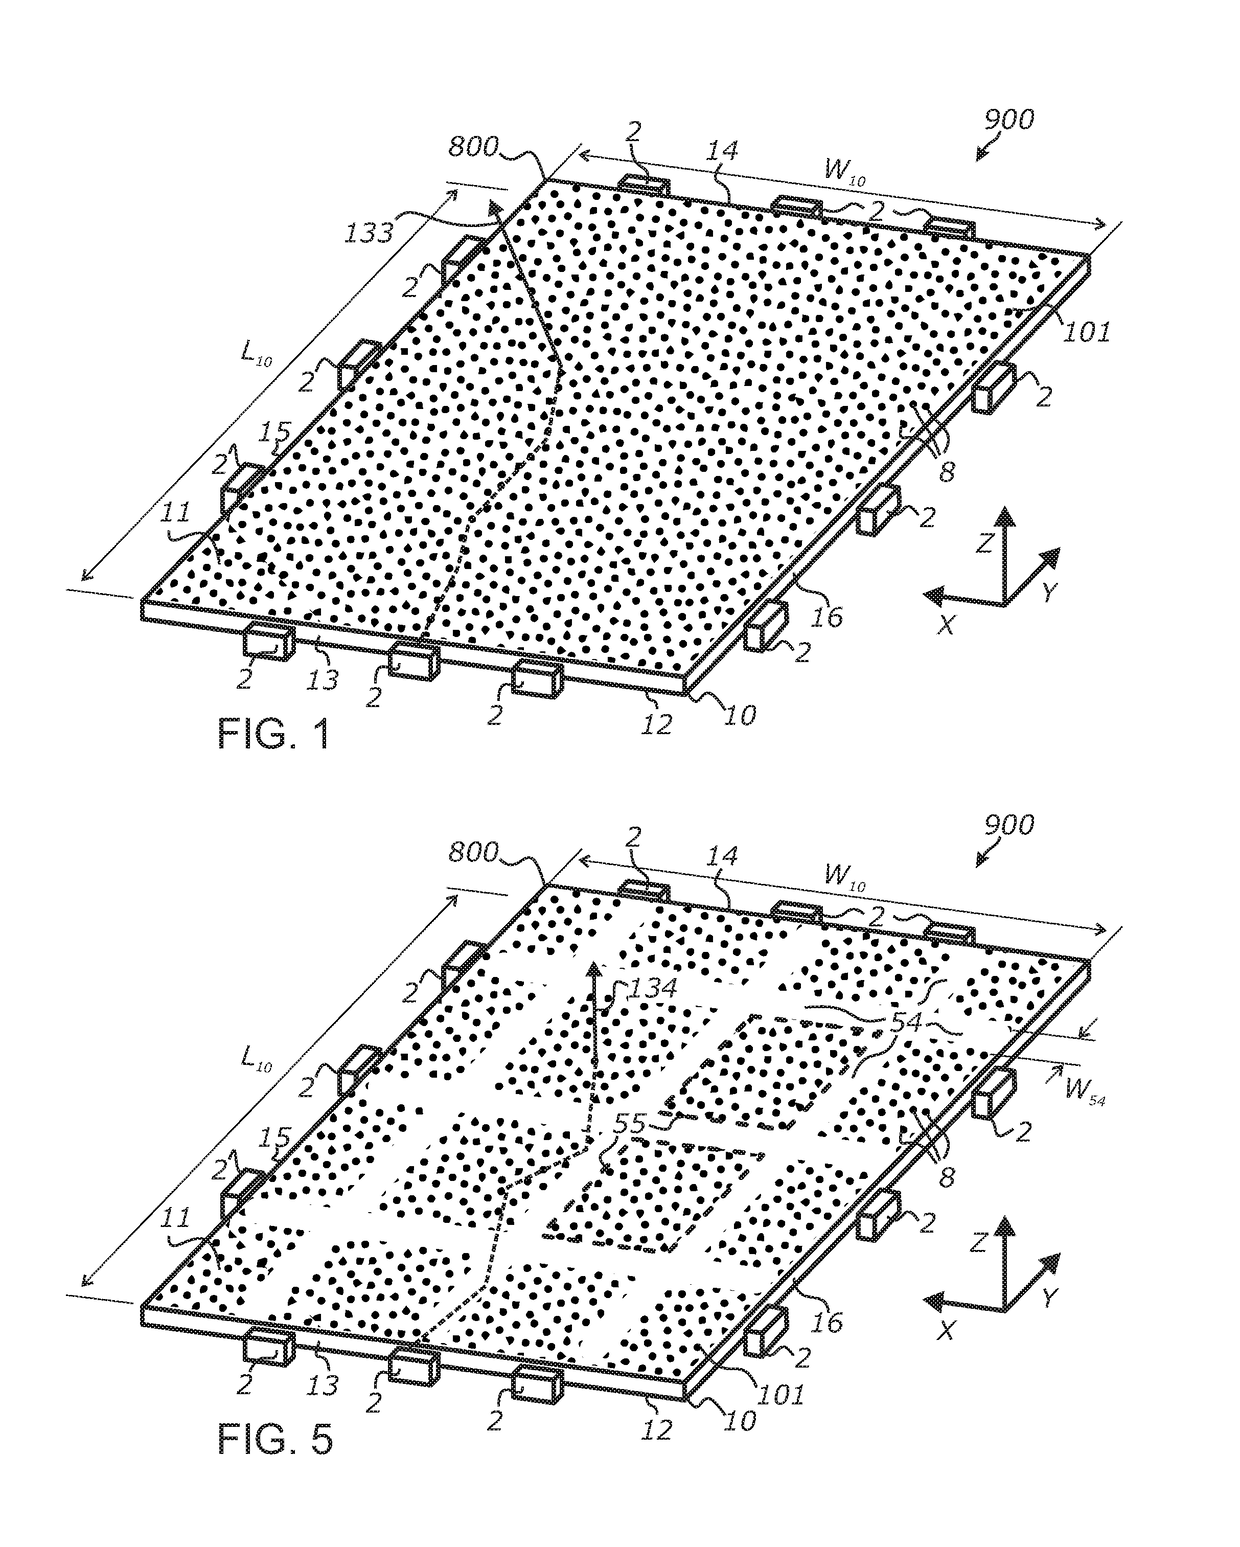 Wide-area solid-state illumination devices and systems